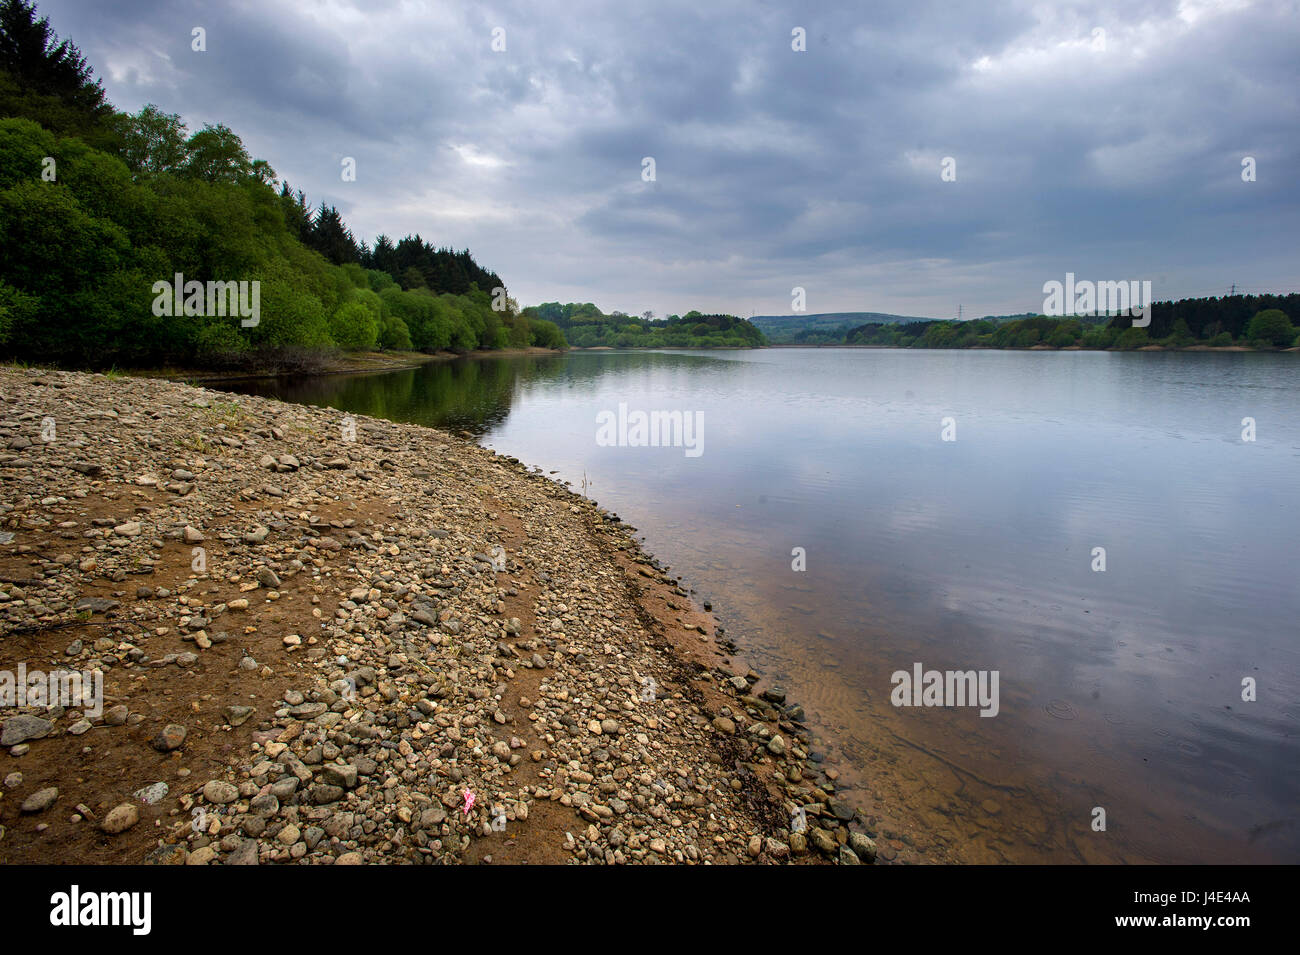 Blackburn, Lancashire, UK. 12th May, 2017. Much needed rain arrives in the North West of England as very low water levels at the United Utilities' Wayoh Reservoir near Bolton, Lancashire, are in need of replenishing. Picture by Paul Heyes, Friday May 12, 2017. Credit: Paul Heyes/Alamy Live News Stock Photo